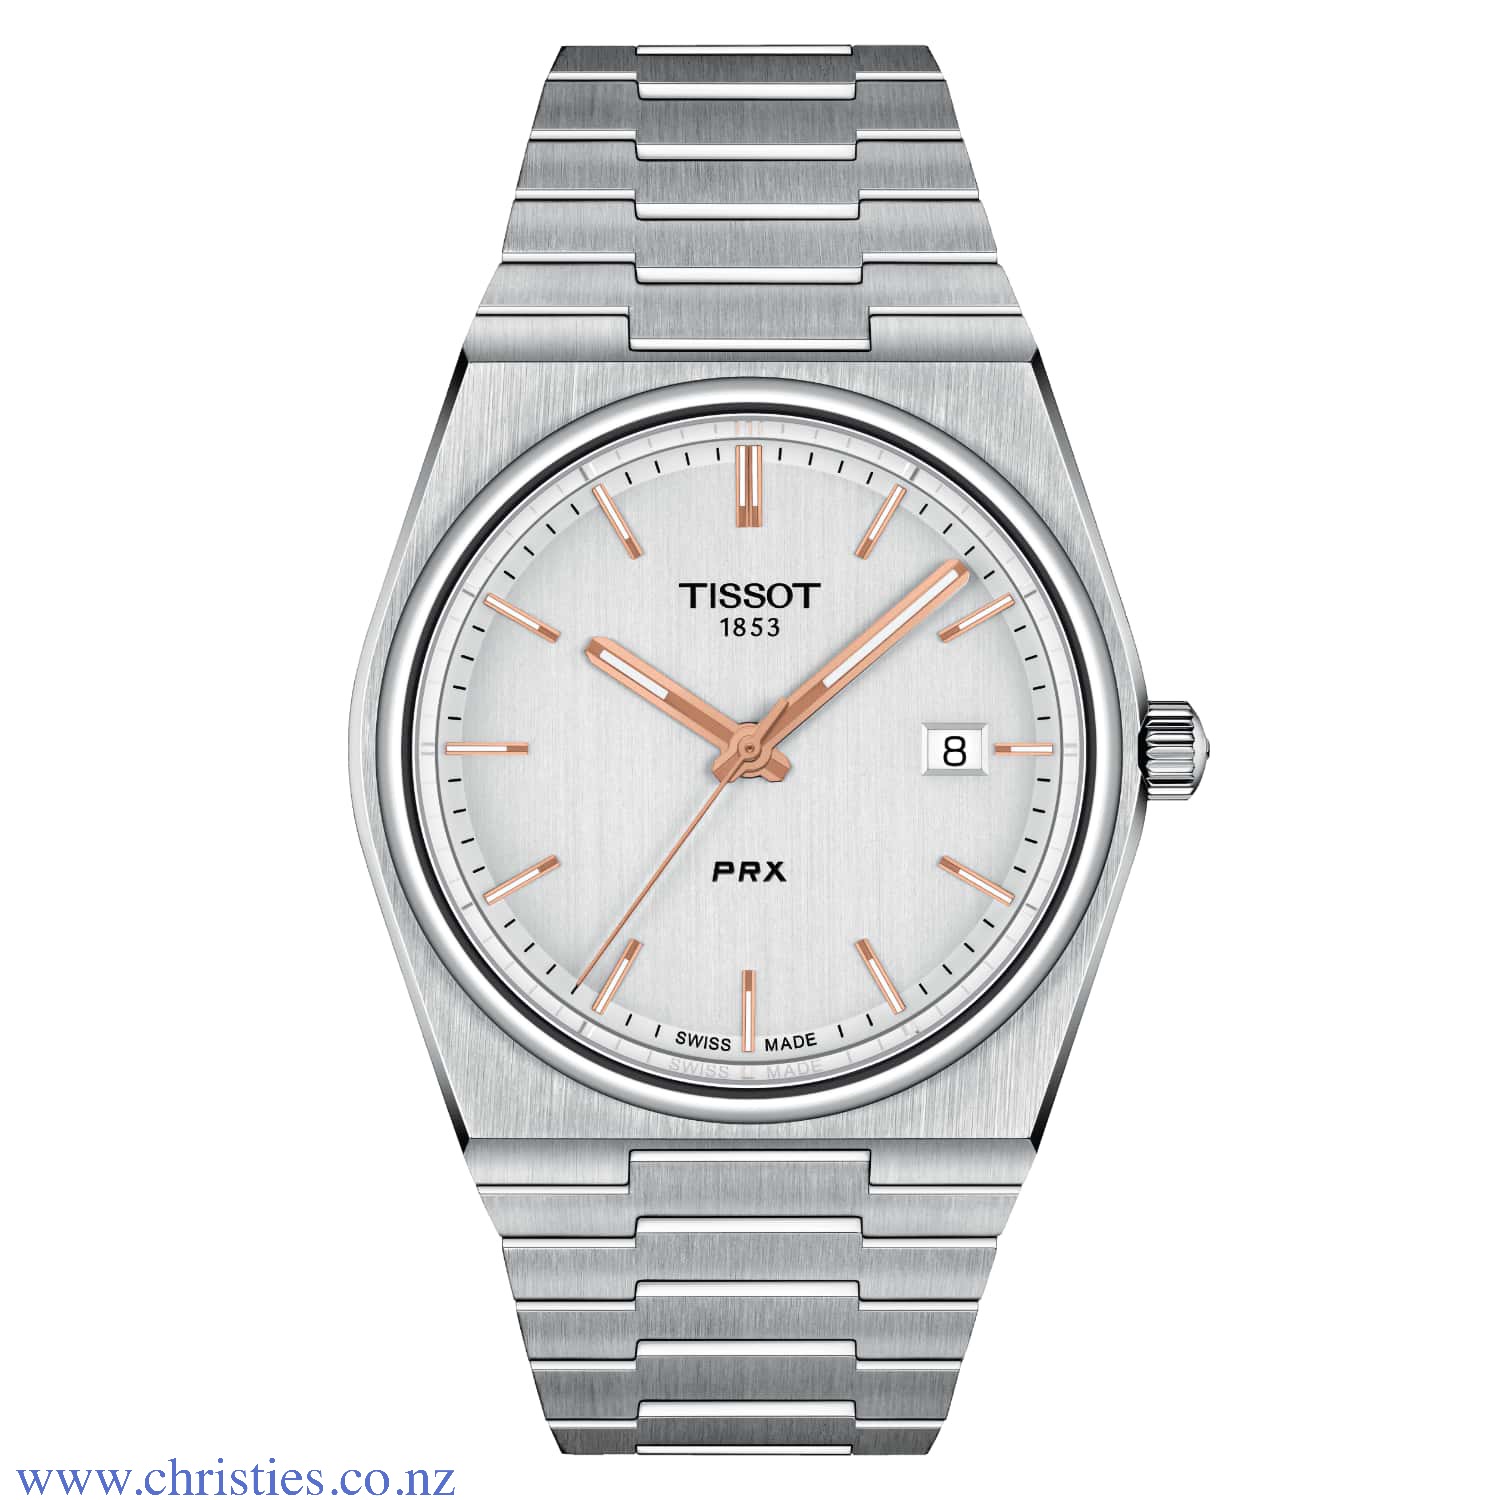 TISSOT PRX T-Classic Stainless Steel Watch T1374101104100. A throwback to a flagship design from 1978, the PRX 40 205 is an essential timepiece with integrated case and bracelet. Made remarkable by its slim, timeless and solid design, this is an ideal wat